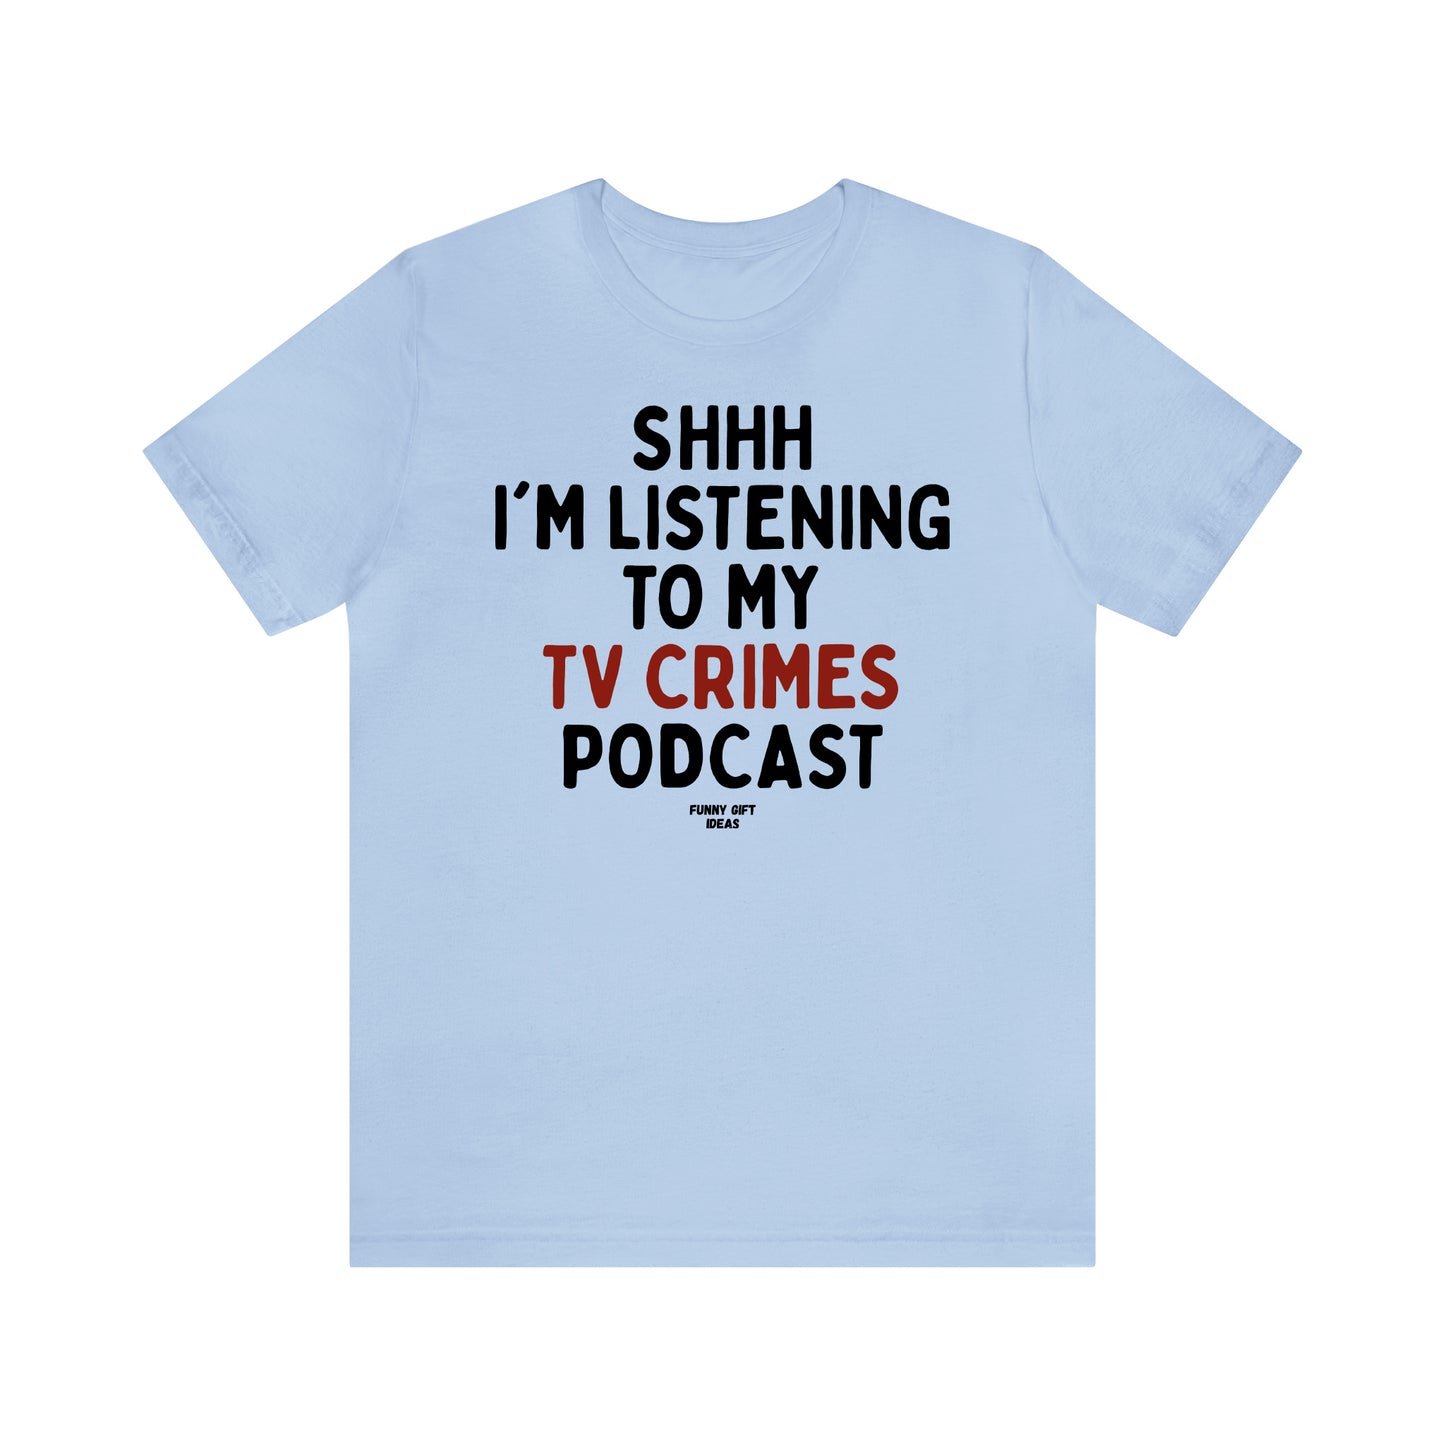 Funny Shirts for Women - Shhh I'm Listening to My True Crime Podcast - Women's T Shirts